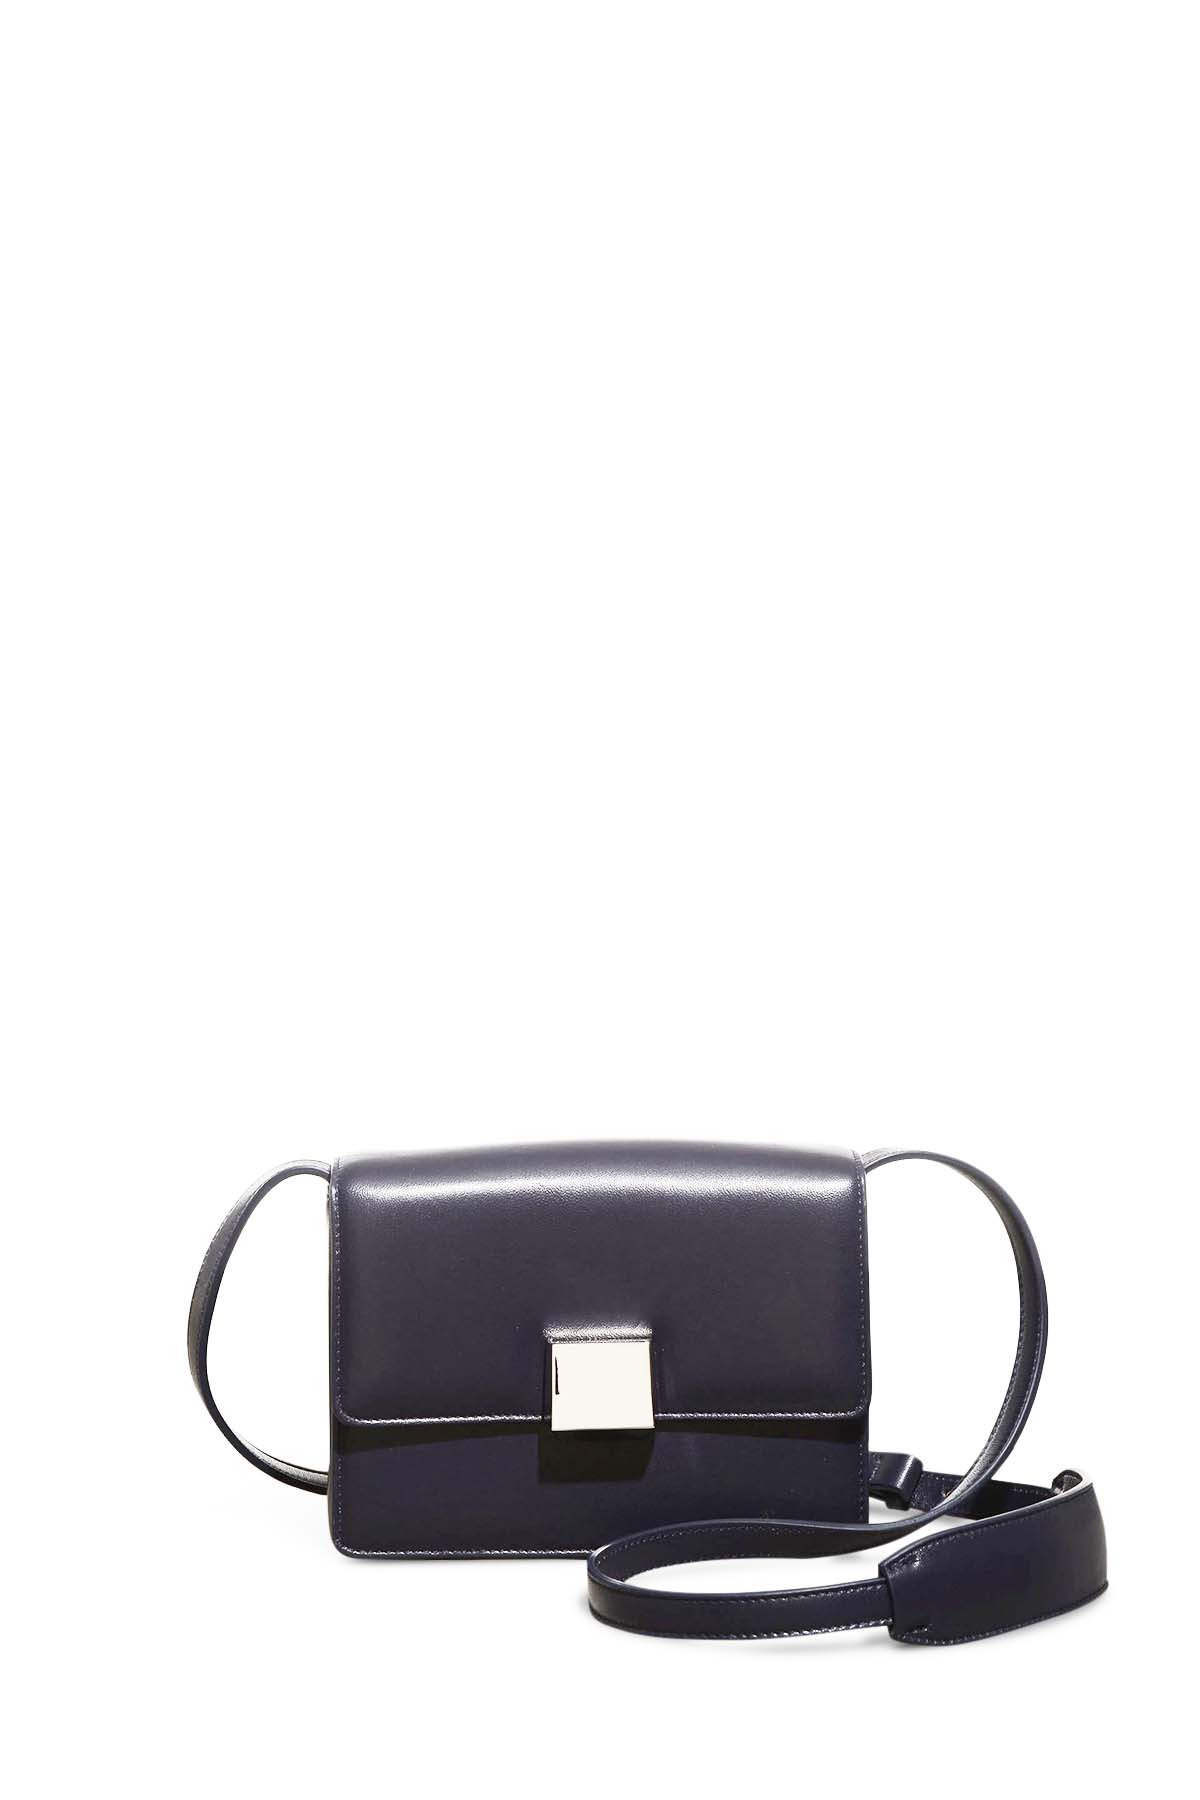 Mercedes Crossbody Bag in Navy Nappa Leather